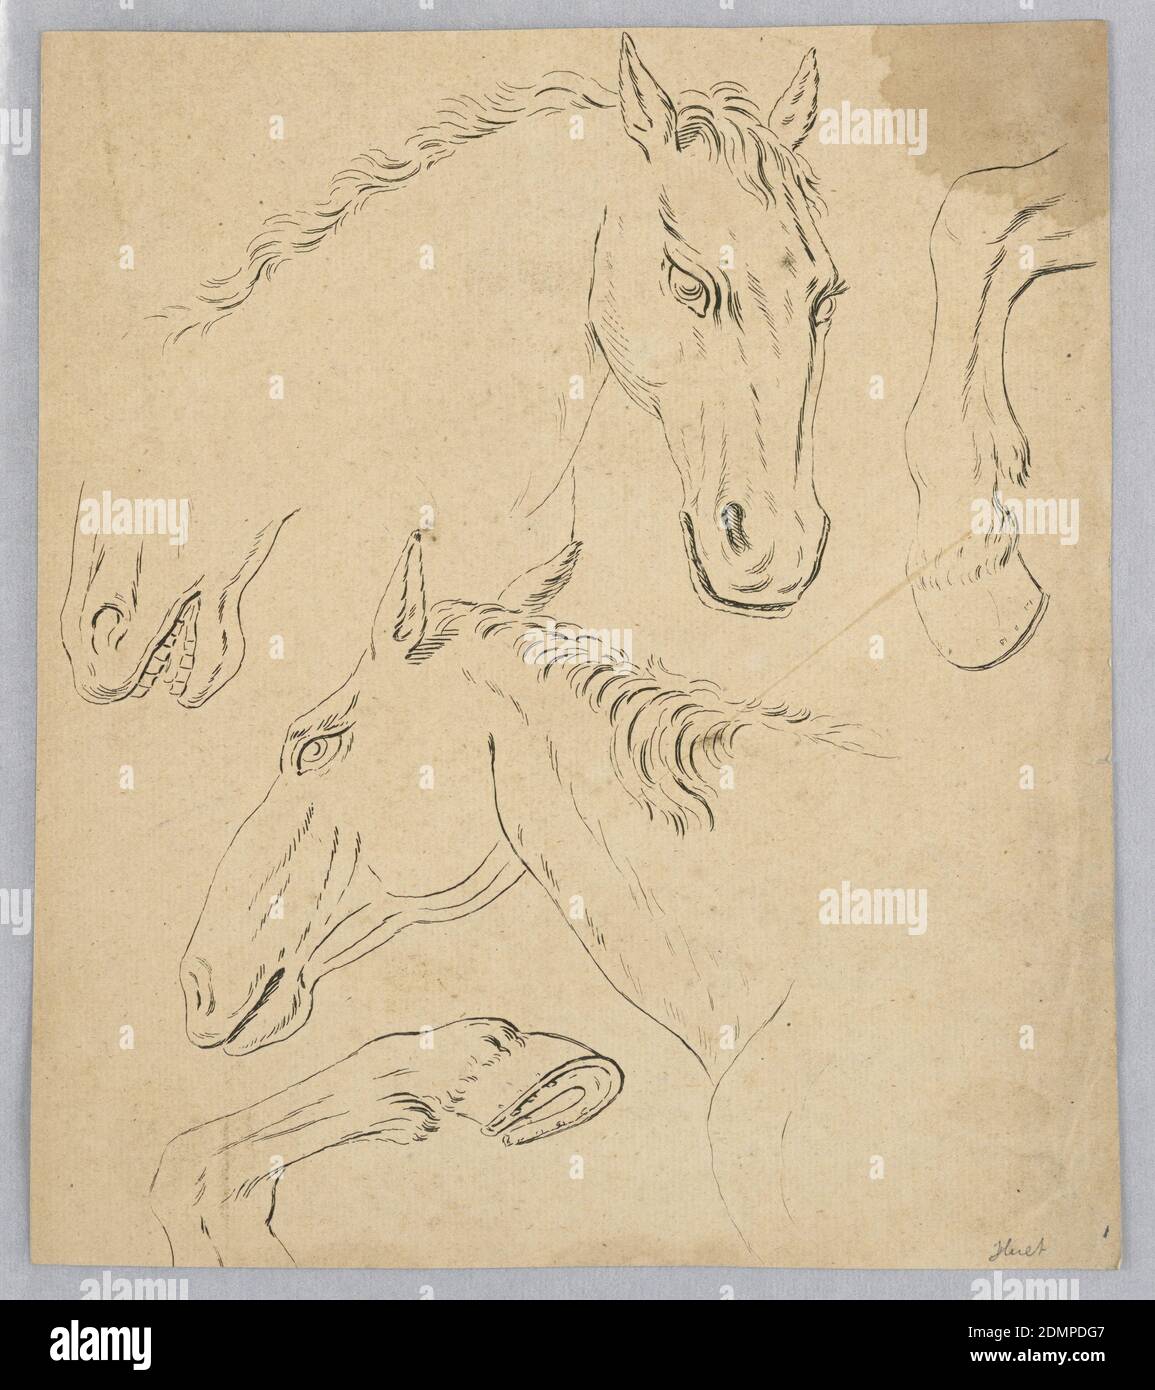 Sketches of Horse Heads and Hooves, Jean-Baptiste Huët, (French, 1745–1811), Etching or engraving on paper, Several sketches of house heads and hooves, Europe, ca. 1745–1811, Print Stock Photo